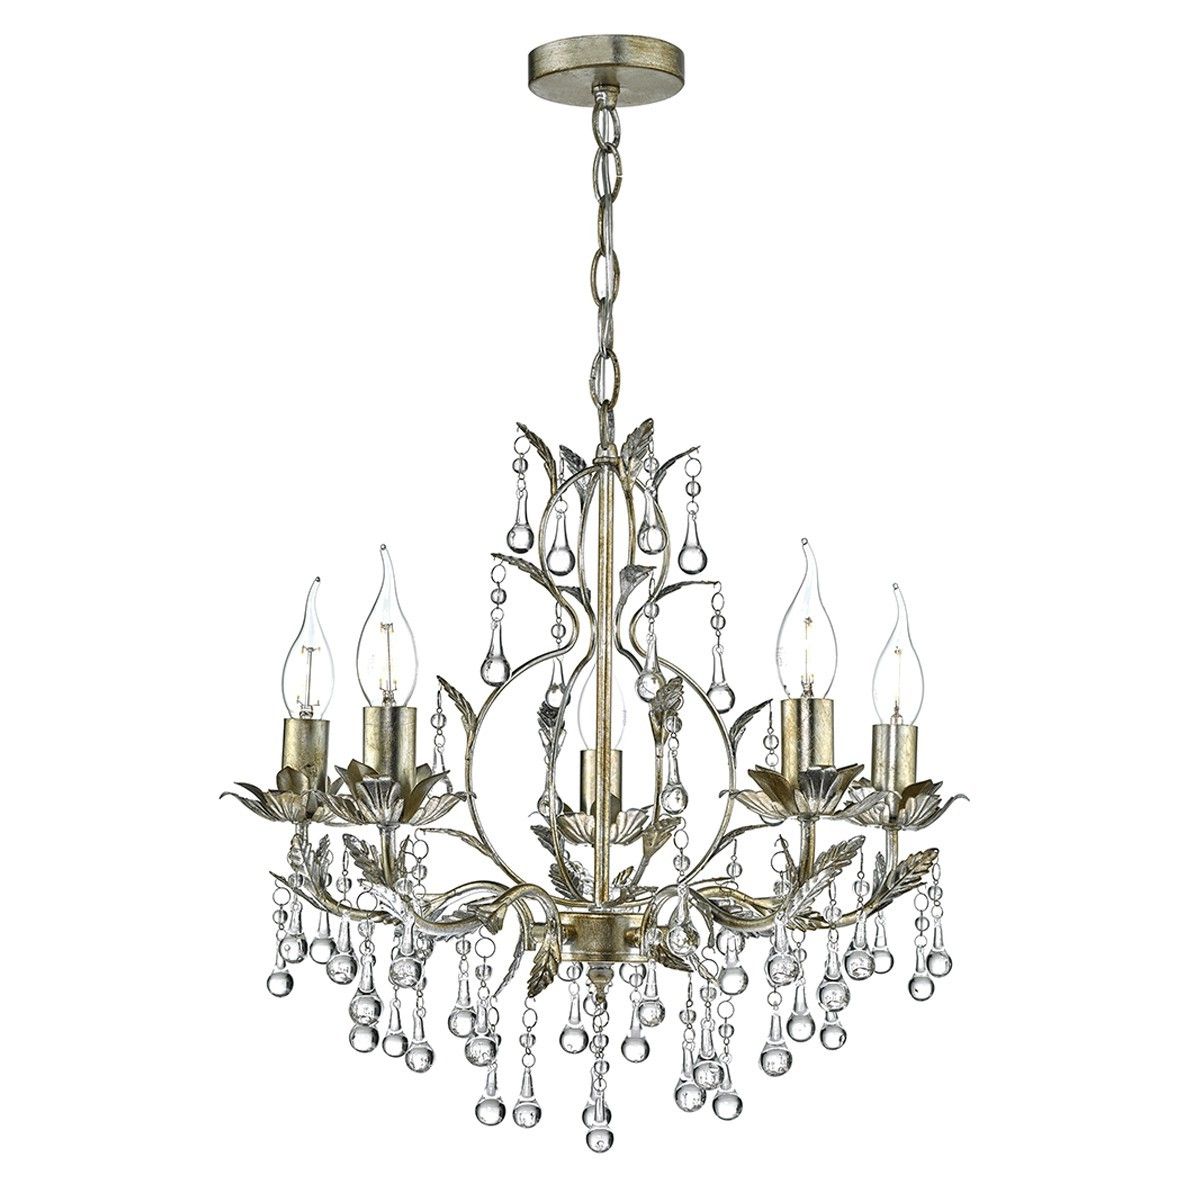 Antique Gild Two Light Chandeliers Within 2020 Dar Laq0535 Laquila 5 Light Chandelier Antique Gold (View 20 of 20)